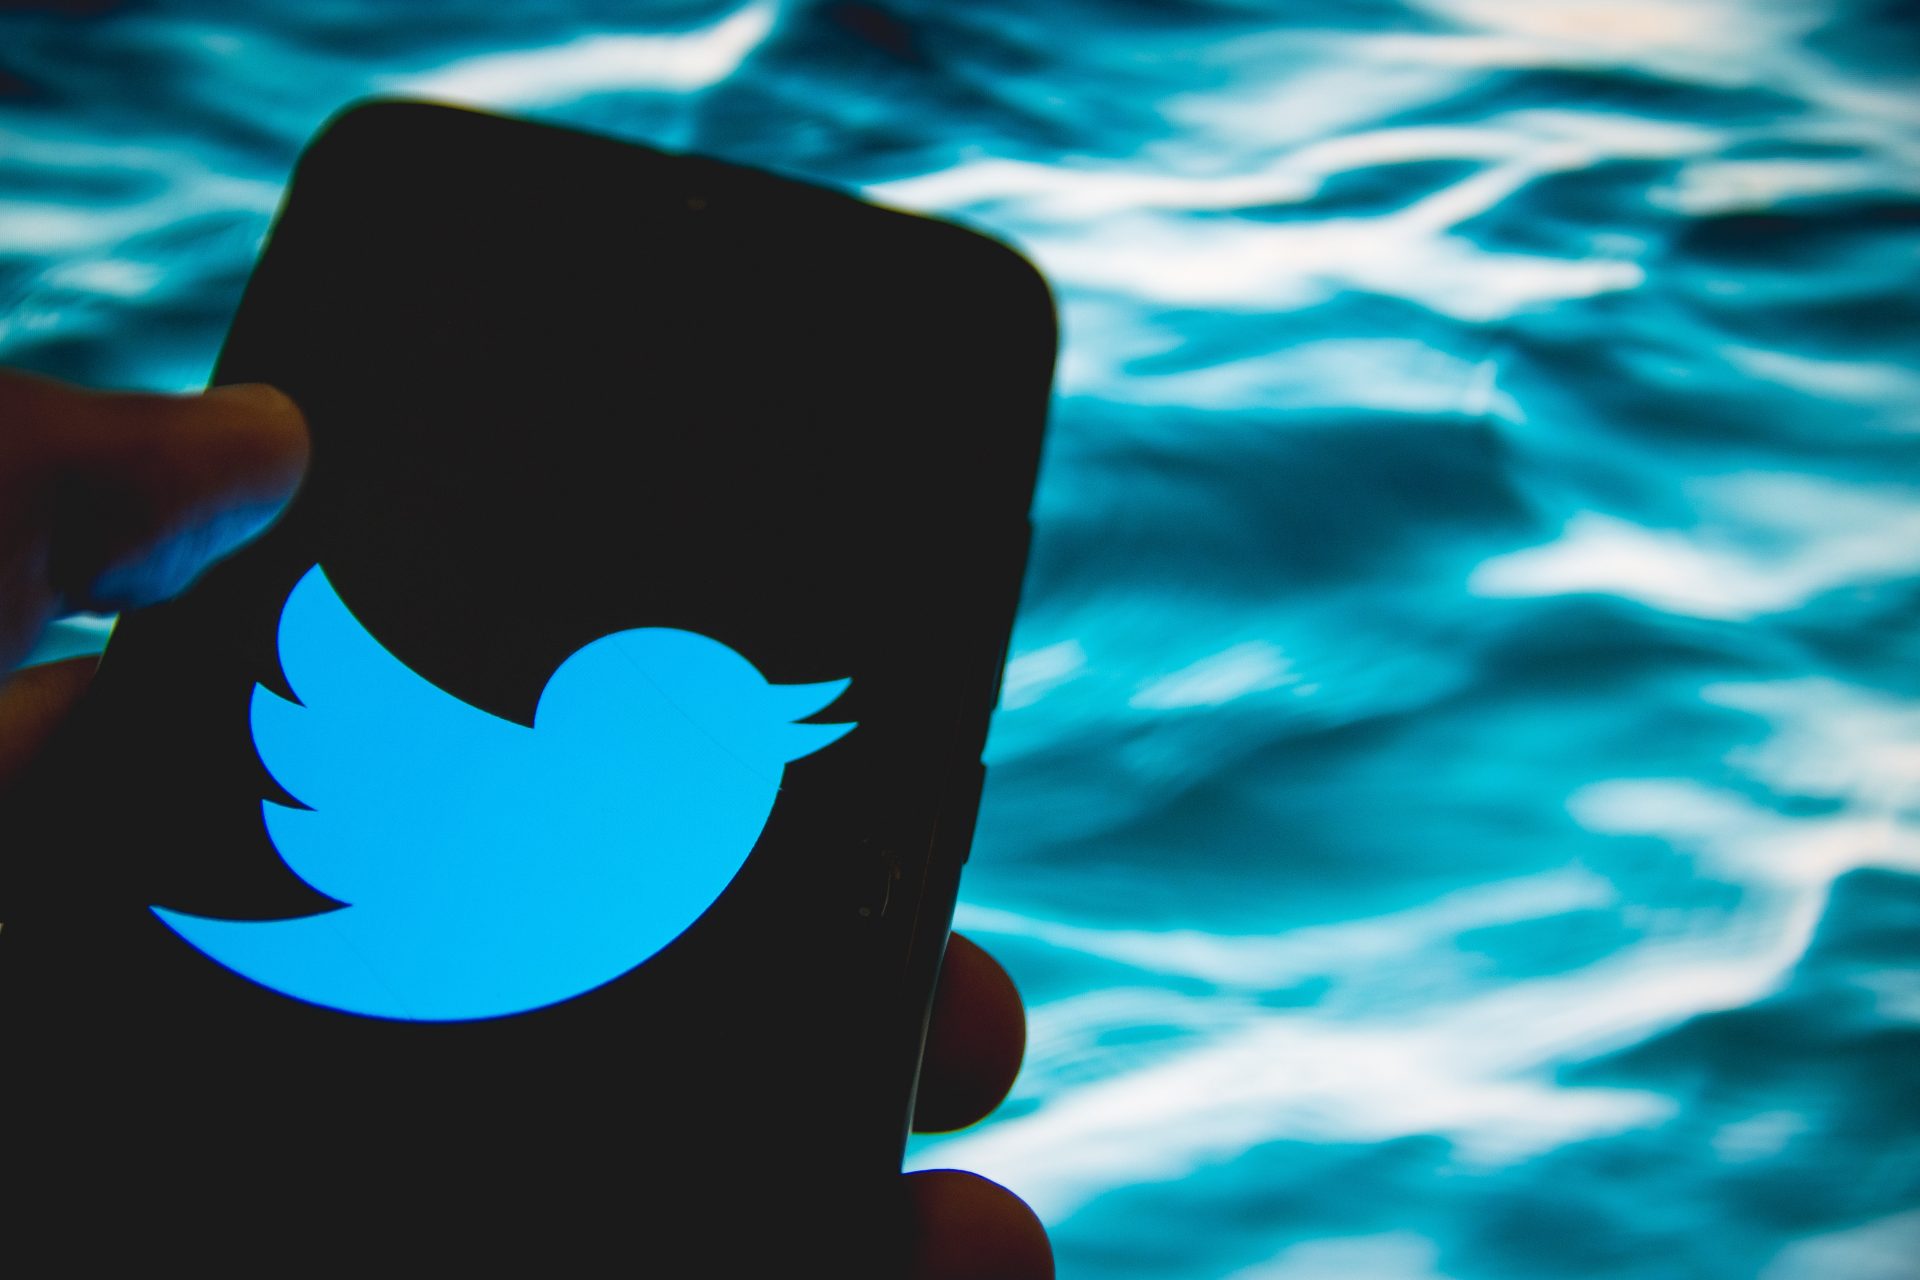 Twitter’s iOS app confirms $3 ‘Twitter Blue’ subscription